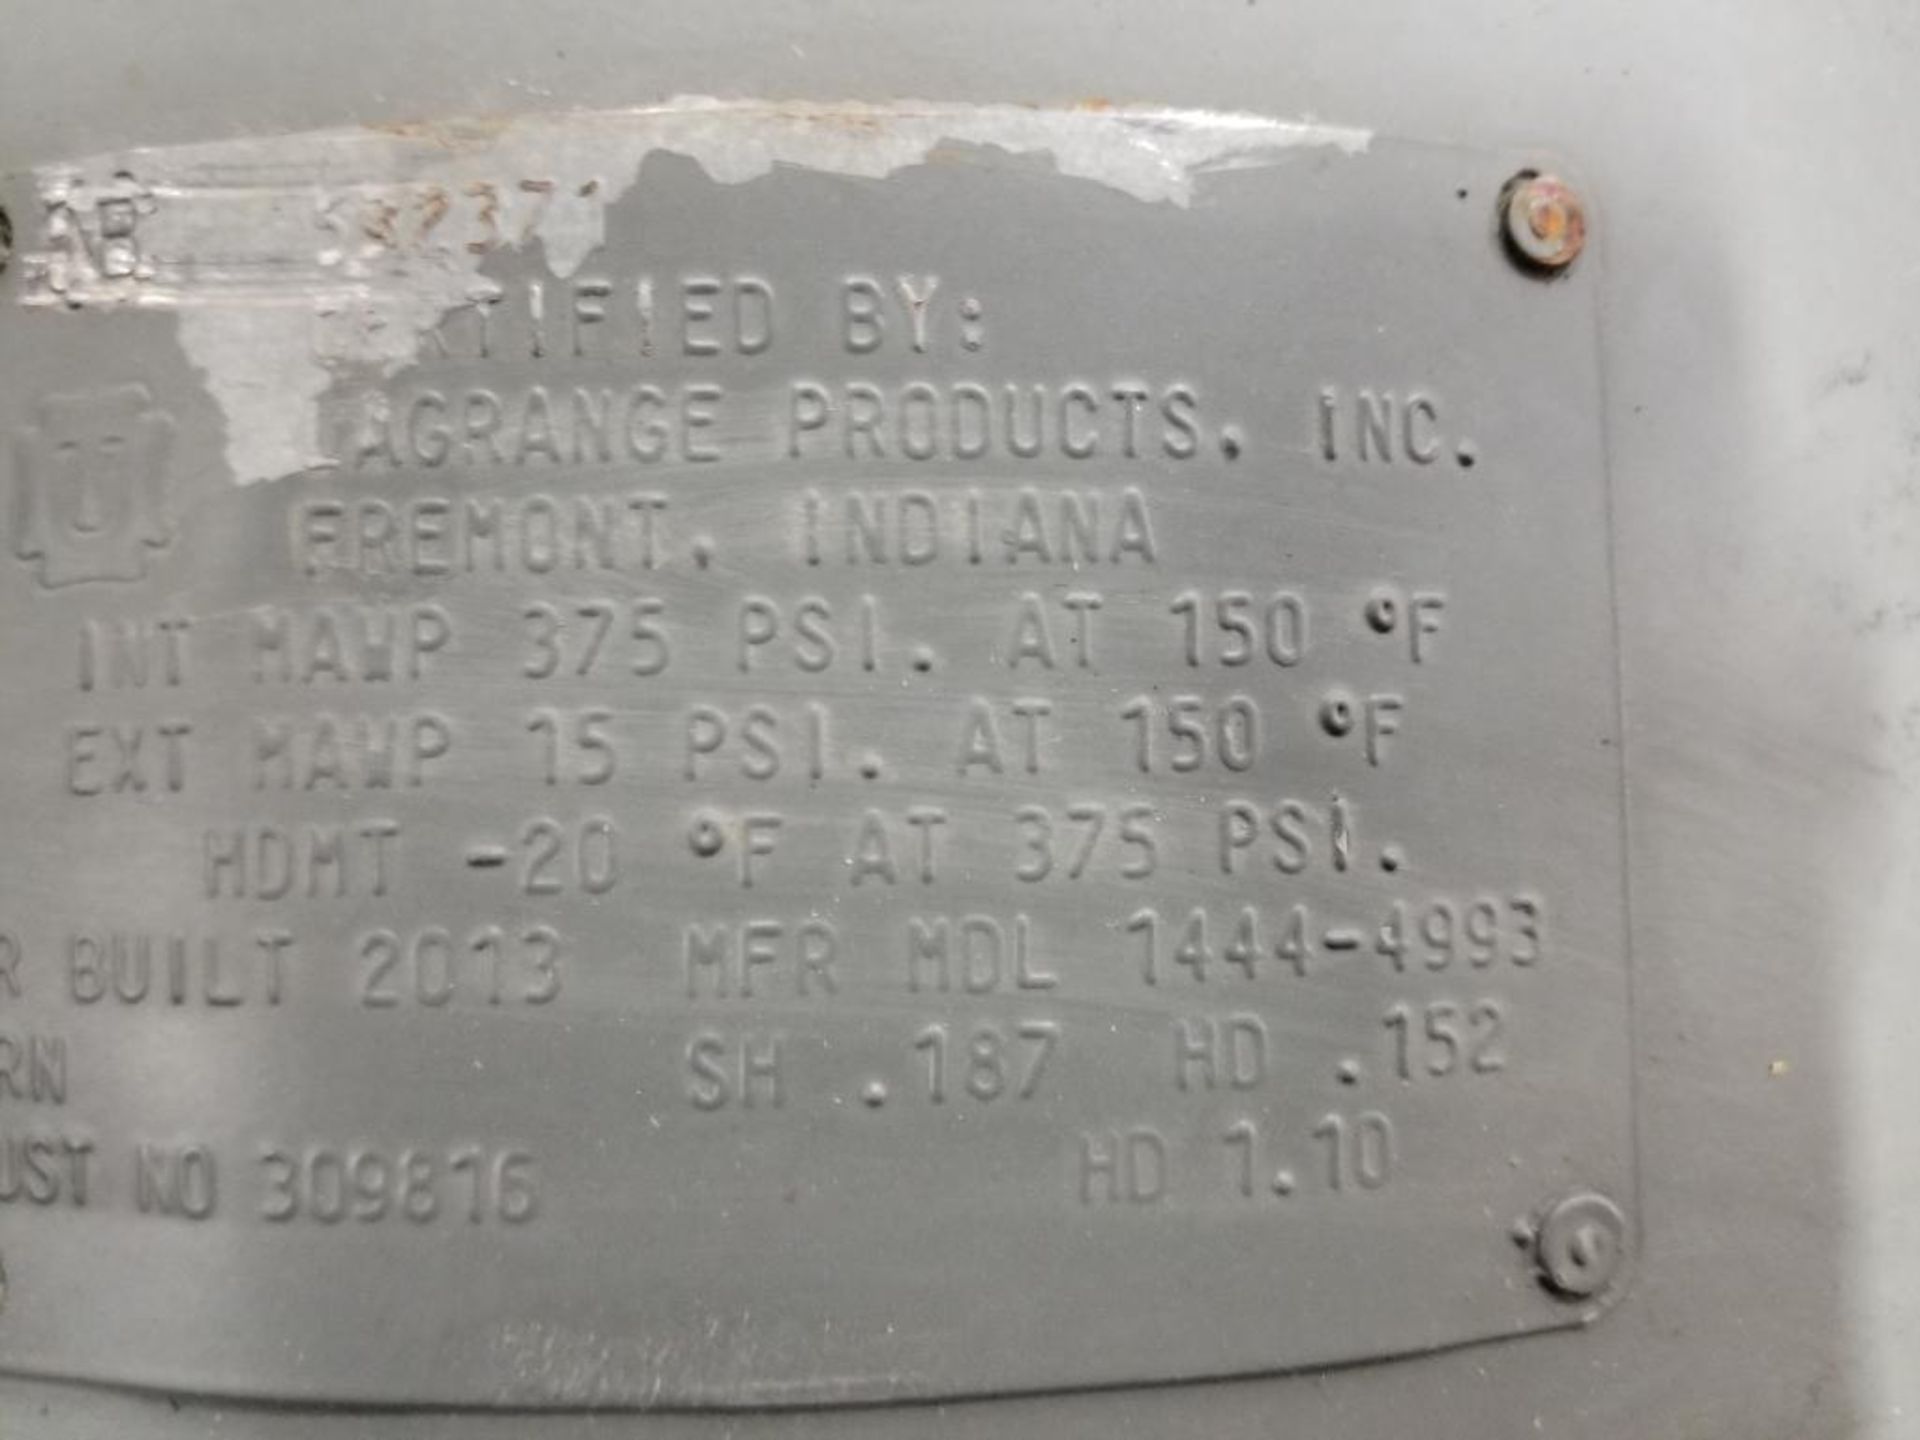 Qty 2 - LaGrange Products INC. 1444-4993 375 PSI certified tanks. - Image 6 of 12